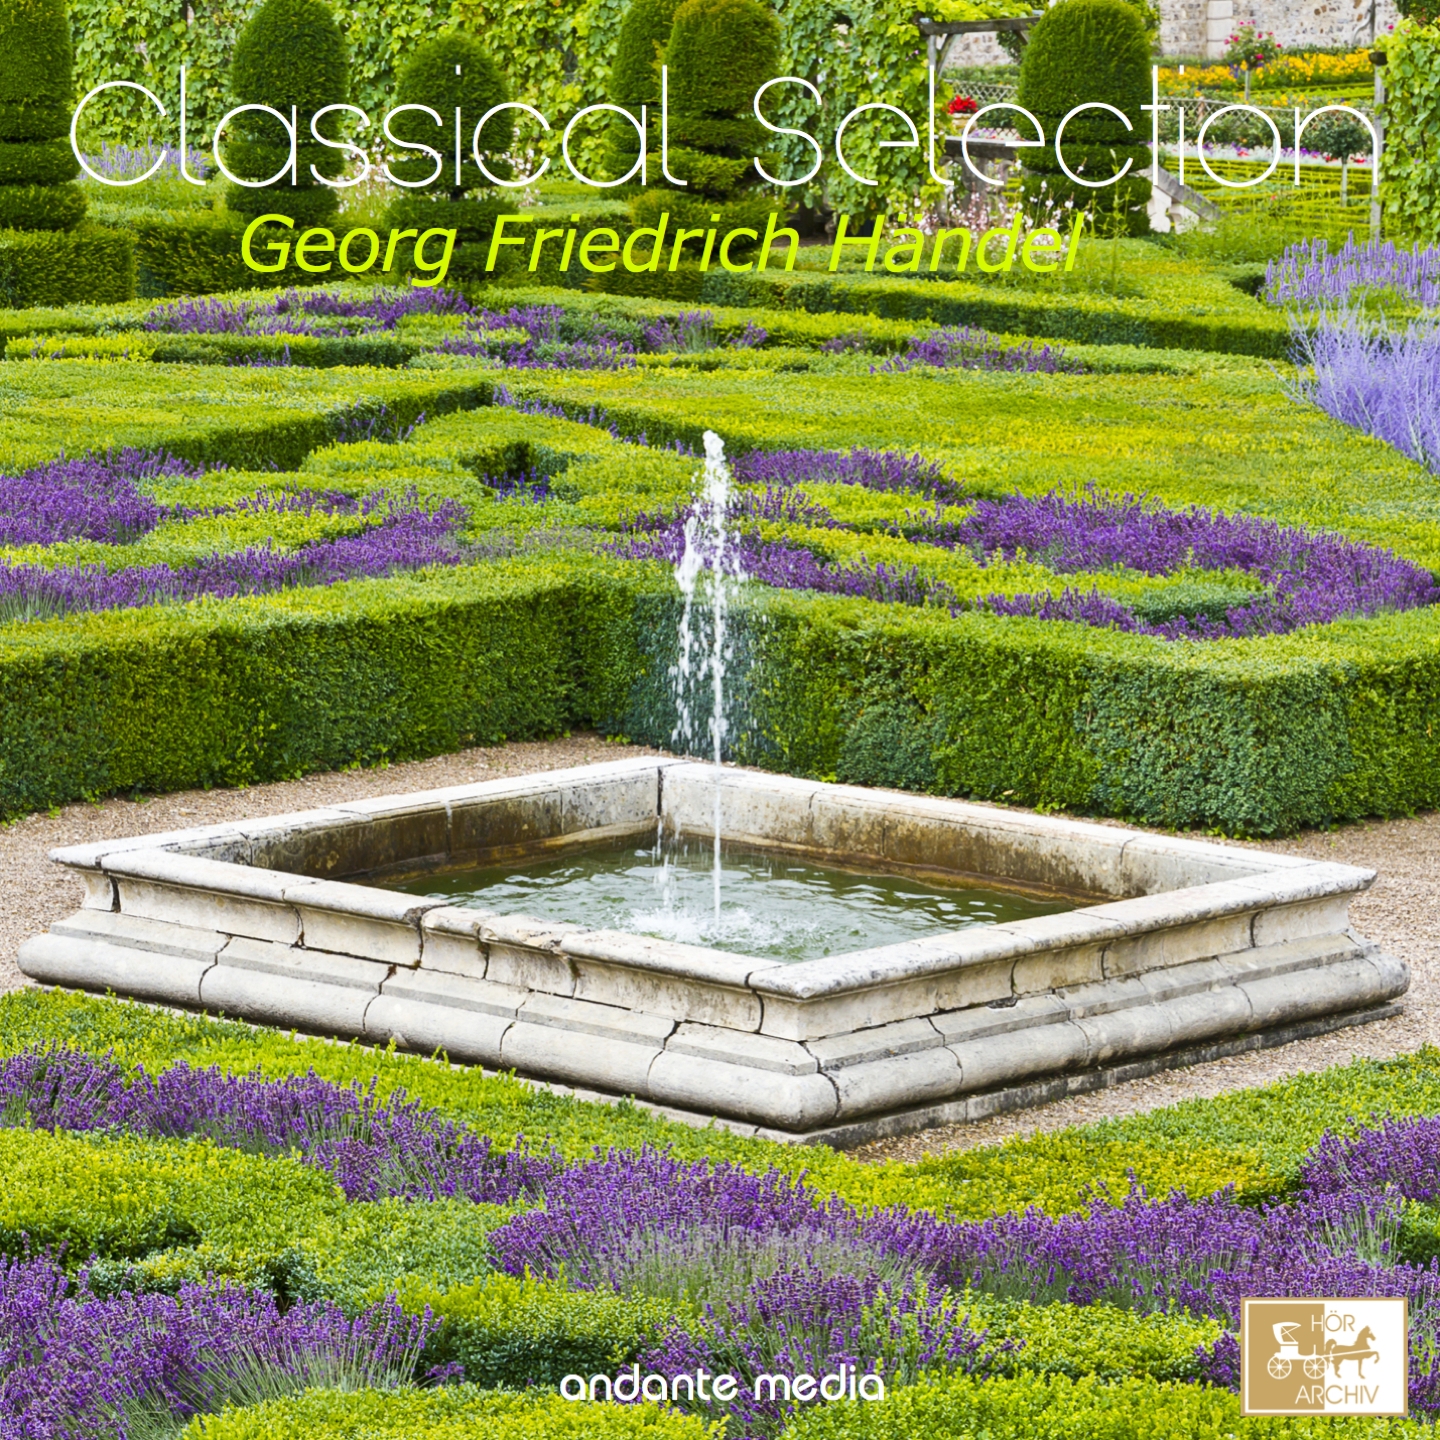 Water Music Suite No. 1 in F Major, HWV 348: Minuet I